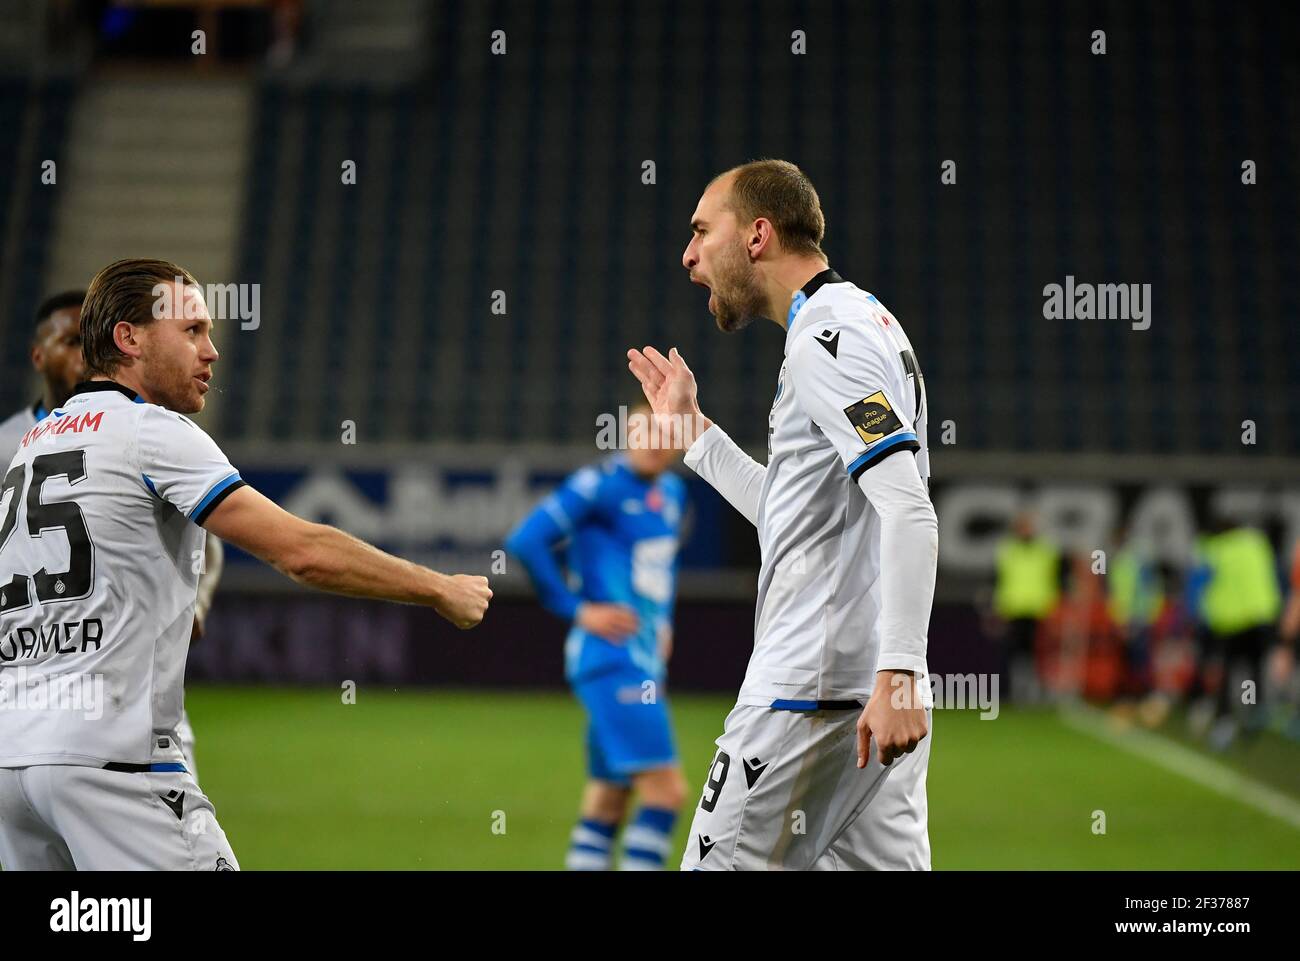 Club's Bas Dost celebrates after scoring during a soccer match between Club Brugge KV and KAA Gent, Monday 15 March 2021 in Brugge, a postponed match Stock Photo